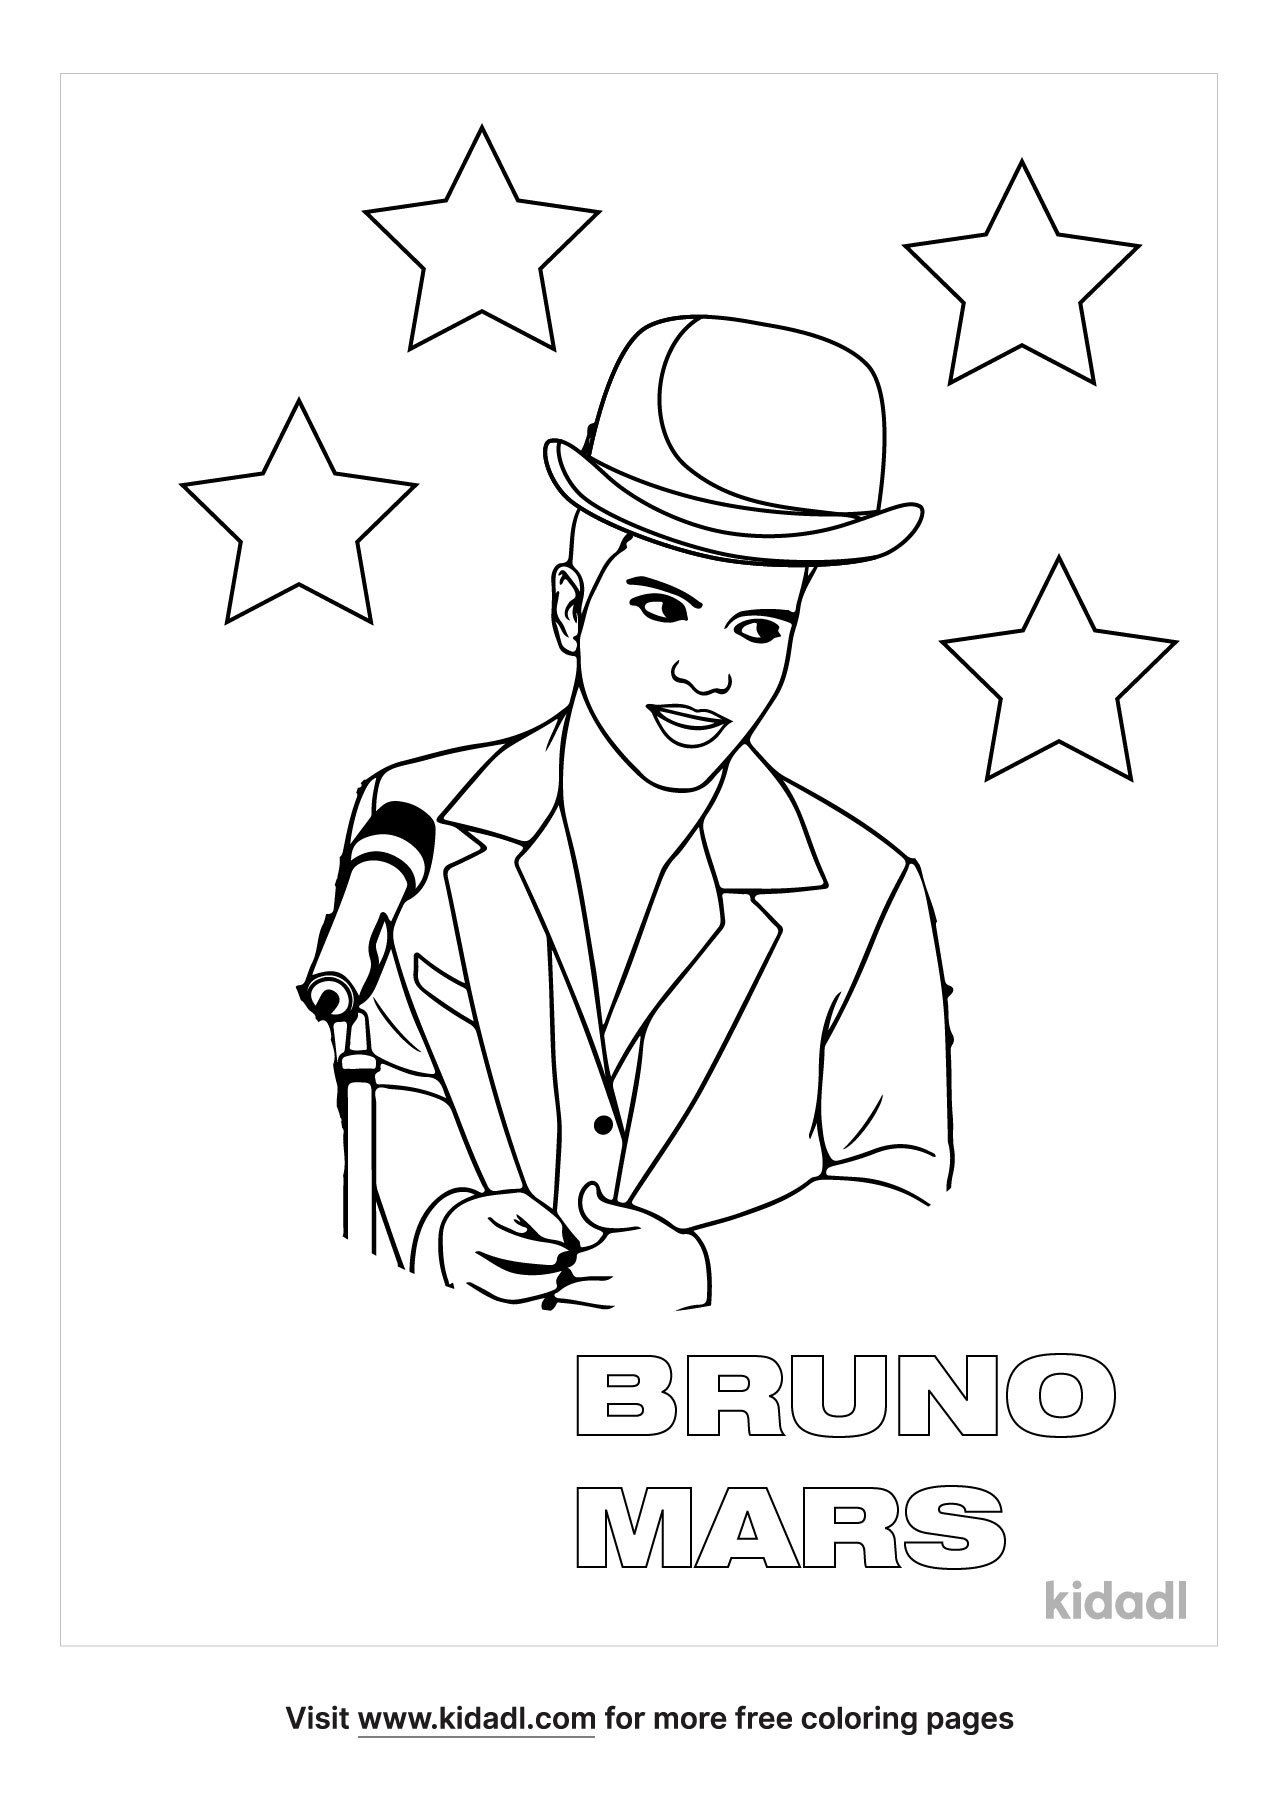 Bruno Mars Coloring Pages | Free People-and-celebrities Coloring Pages |  Kidadl